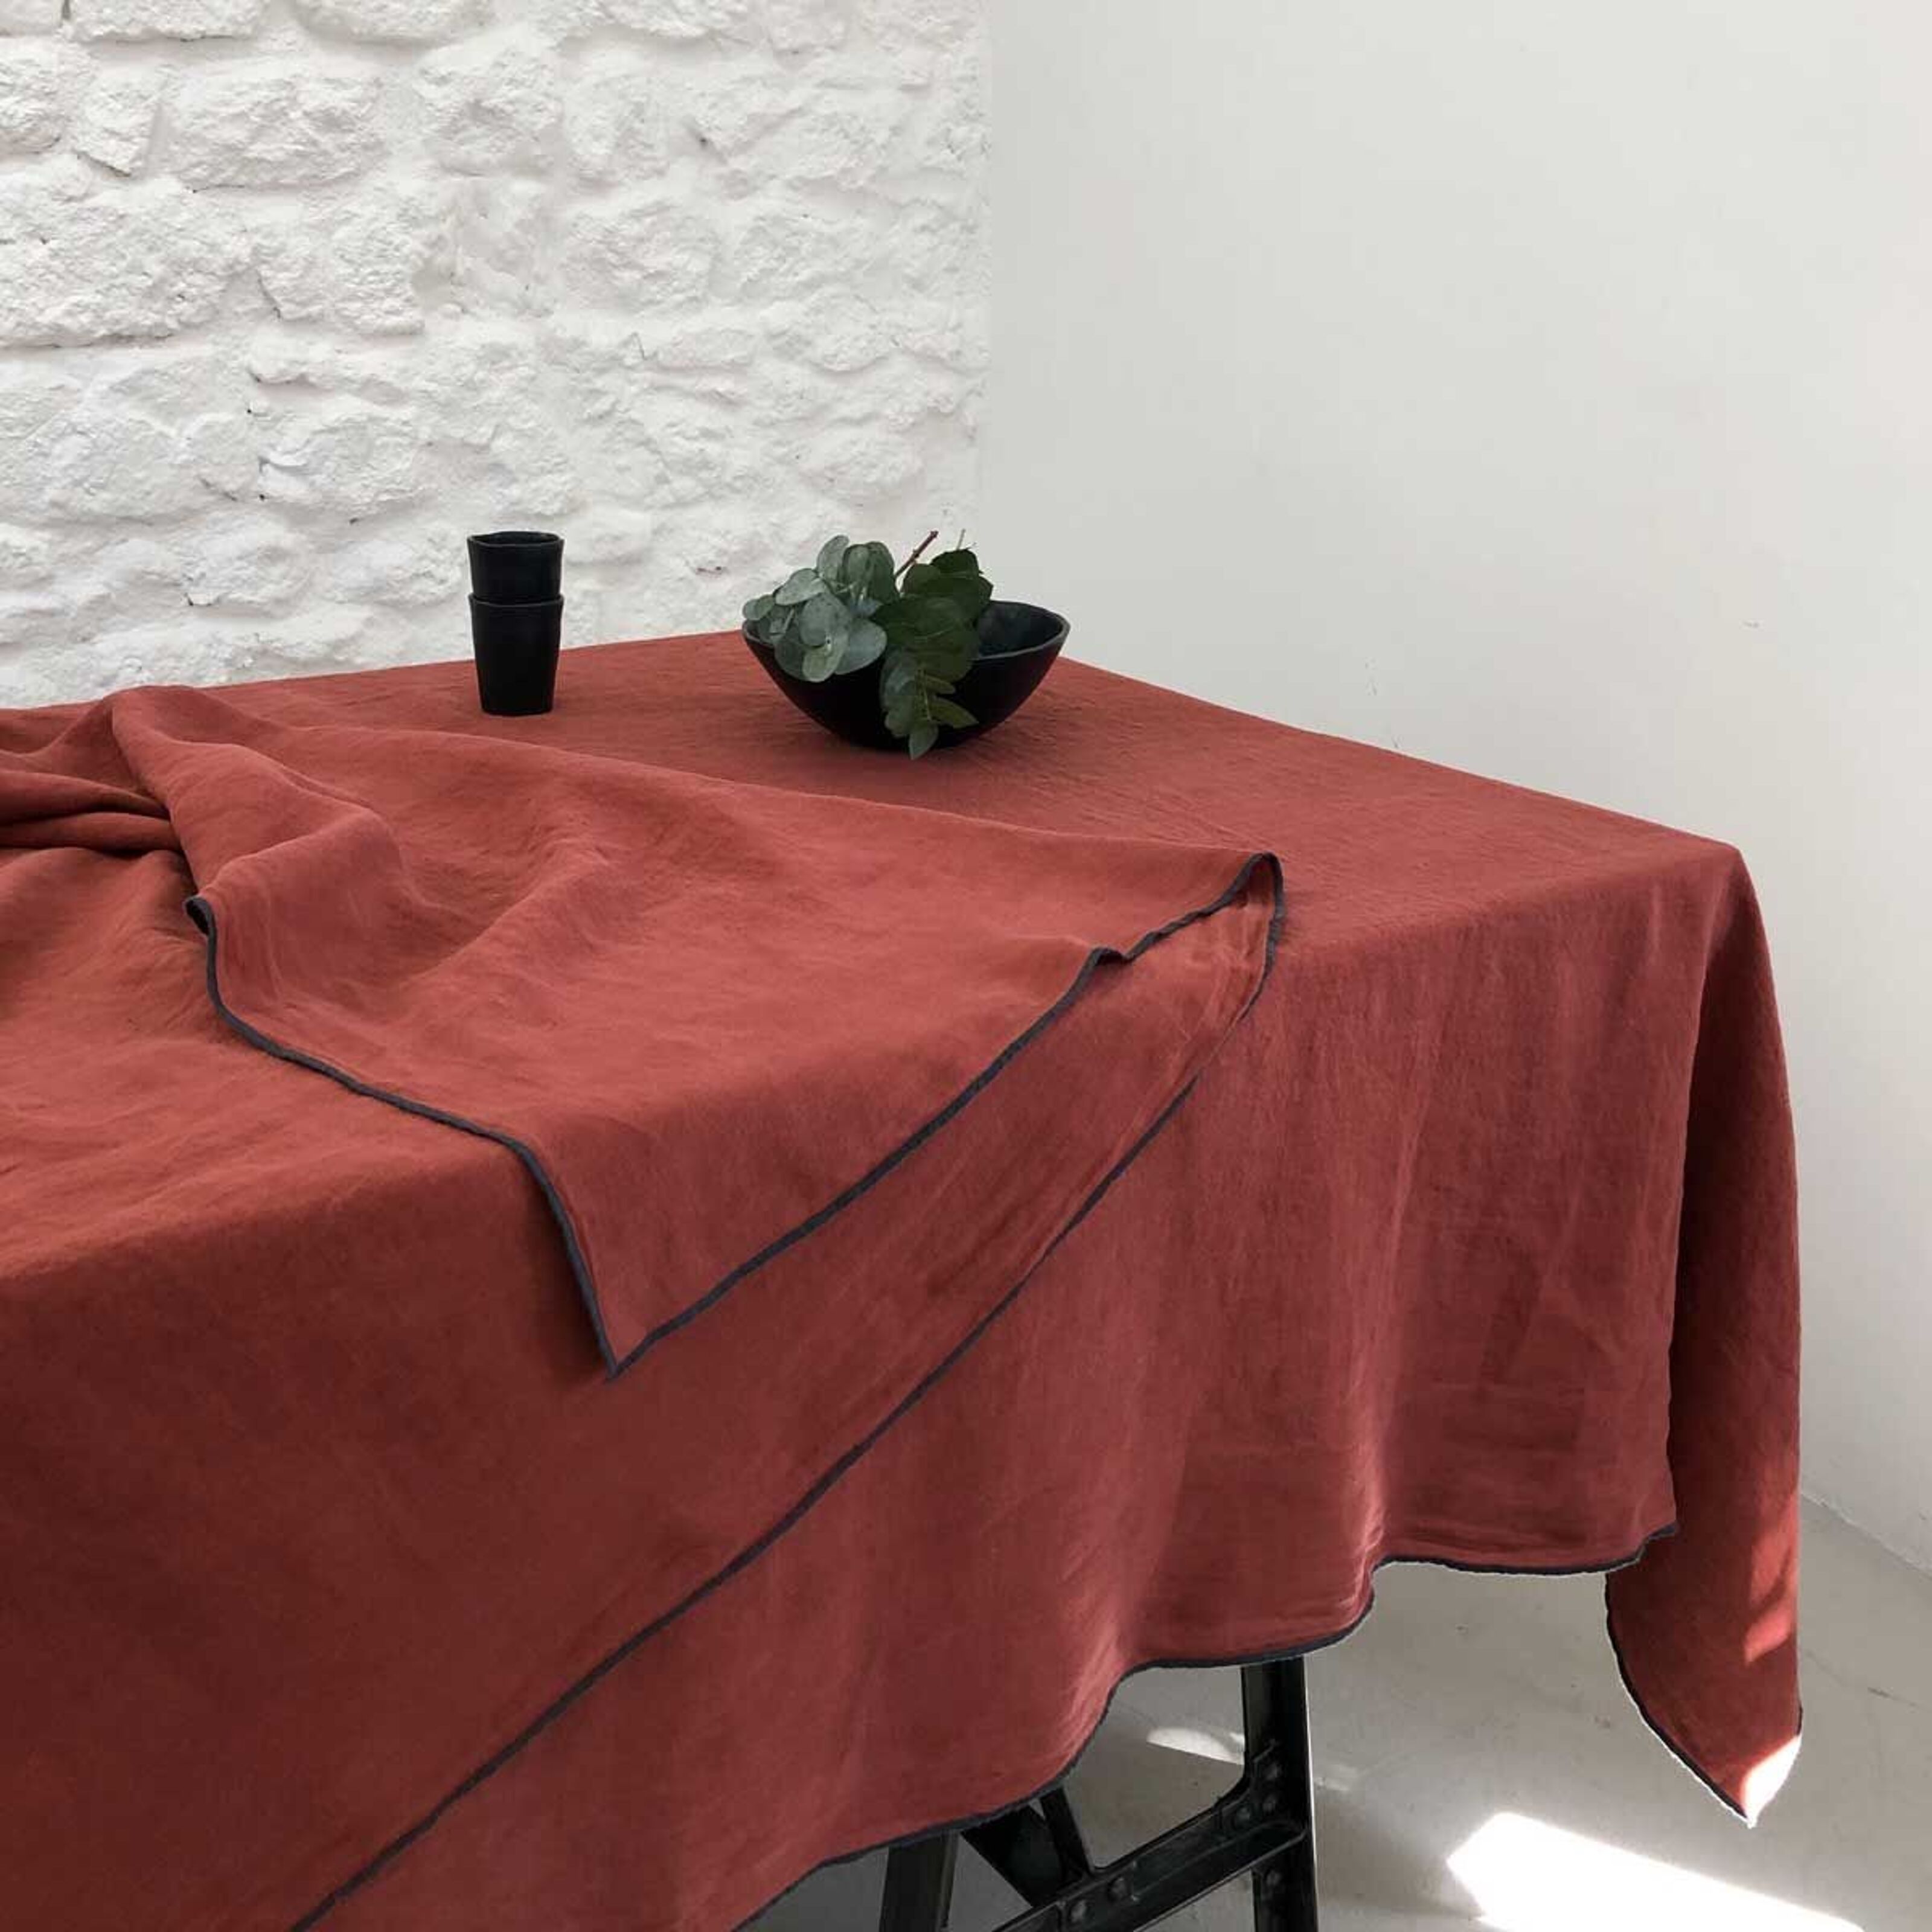 Buy wholesale Oslo Passage Vernet terracotta overlock washed linen  tablecloth or curtain - 170x300cm